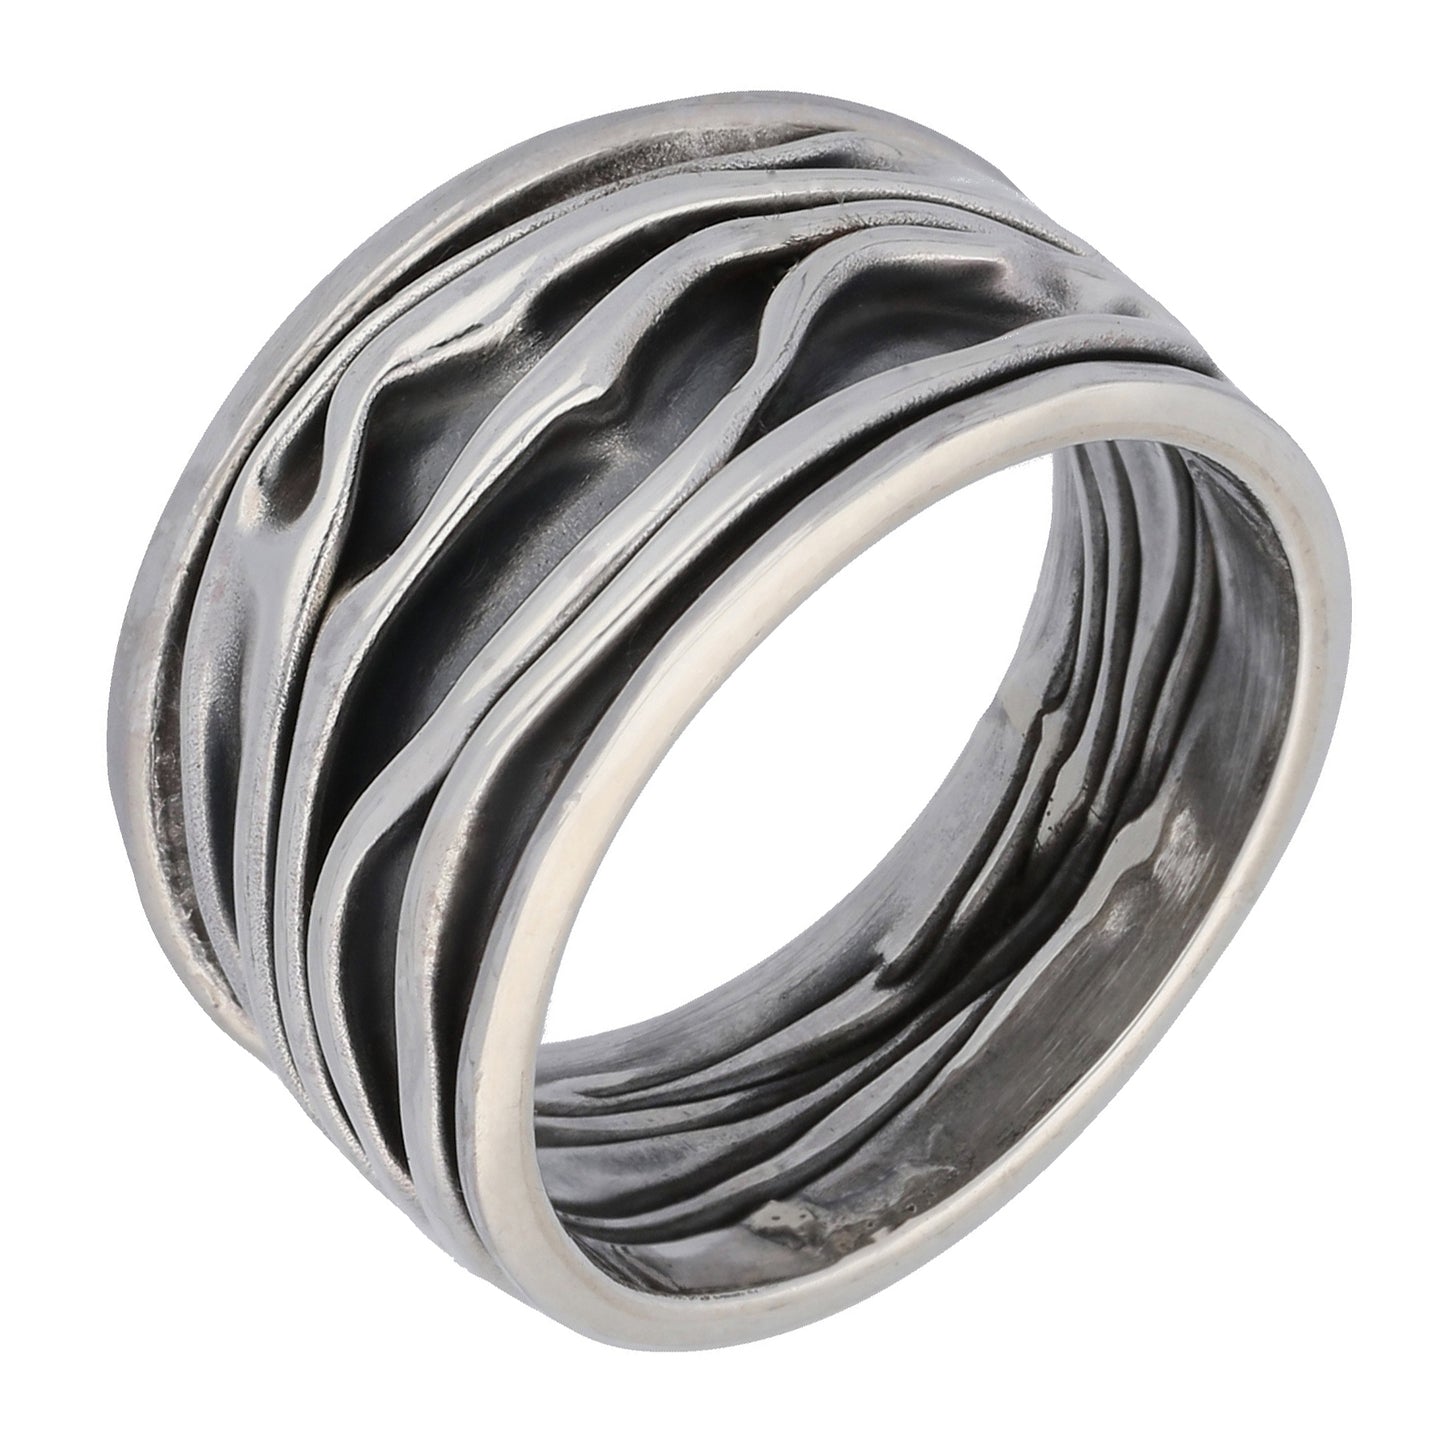 Wrinkled Unique Crushed Can Wide Armor Band Sterling Silver Ring - Silver Insanity